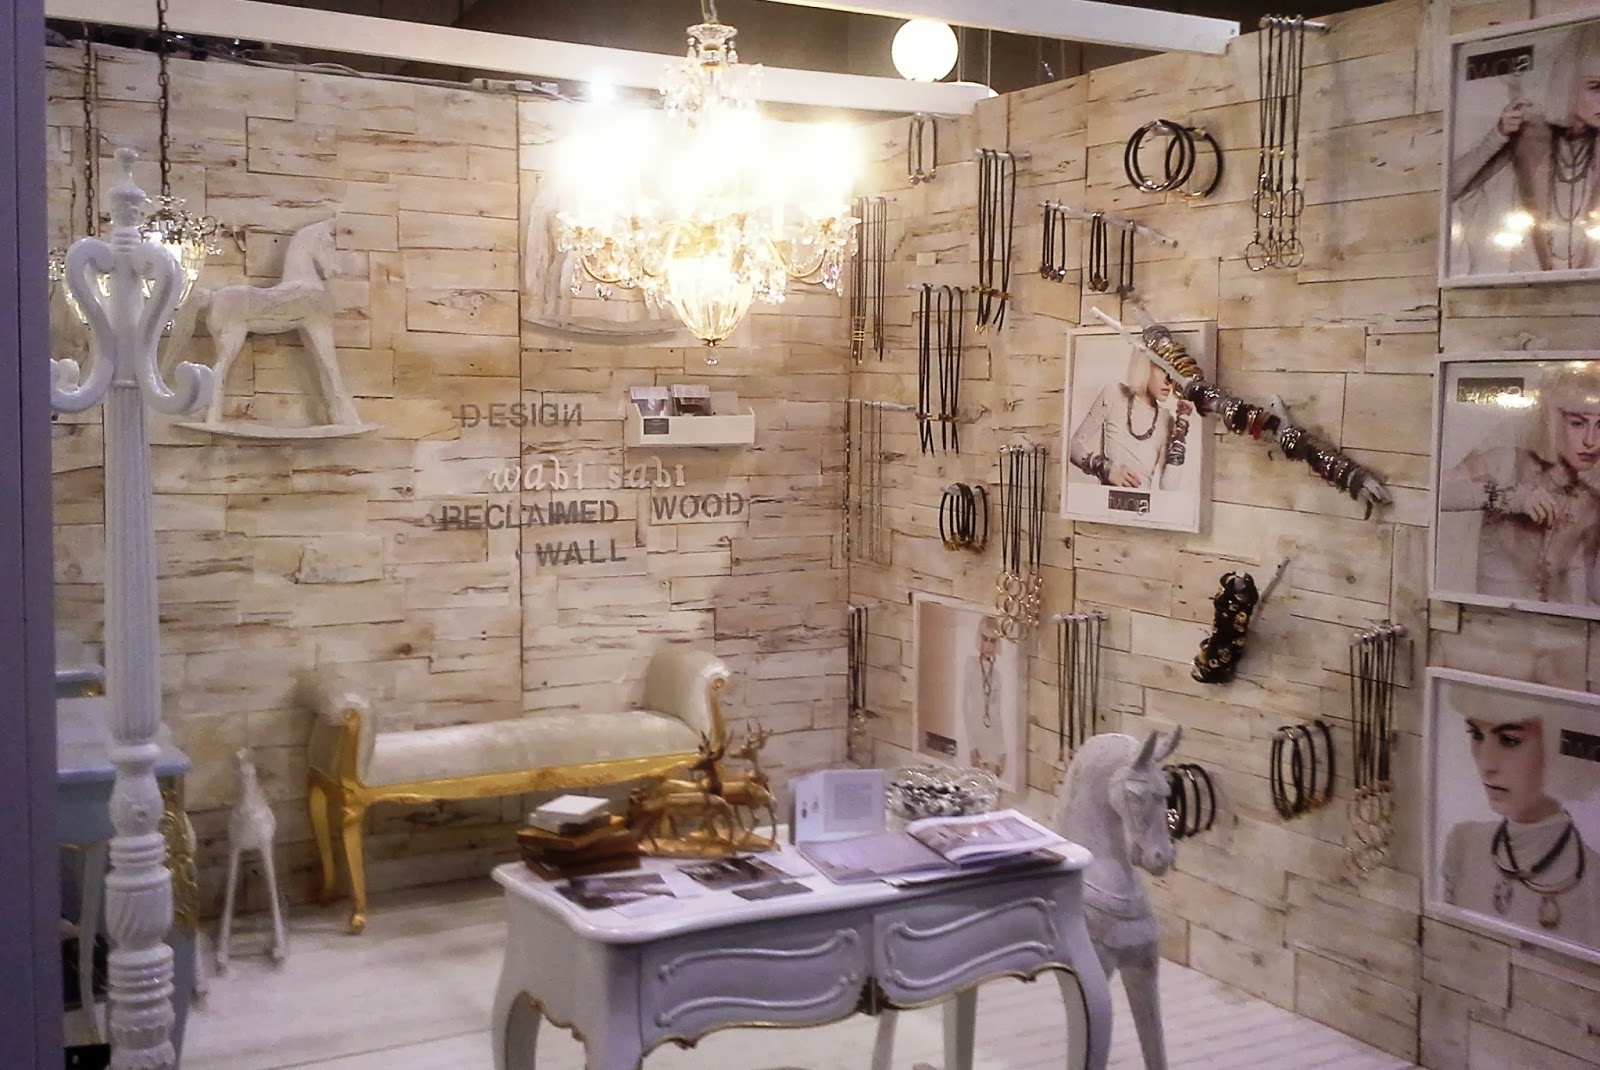 Shafrir Booth at The Interior Design Show in Toronto, fashion, interior design blogger style Melanie.Ps The Purple Scarf